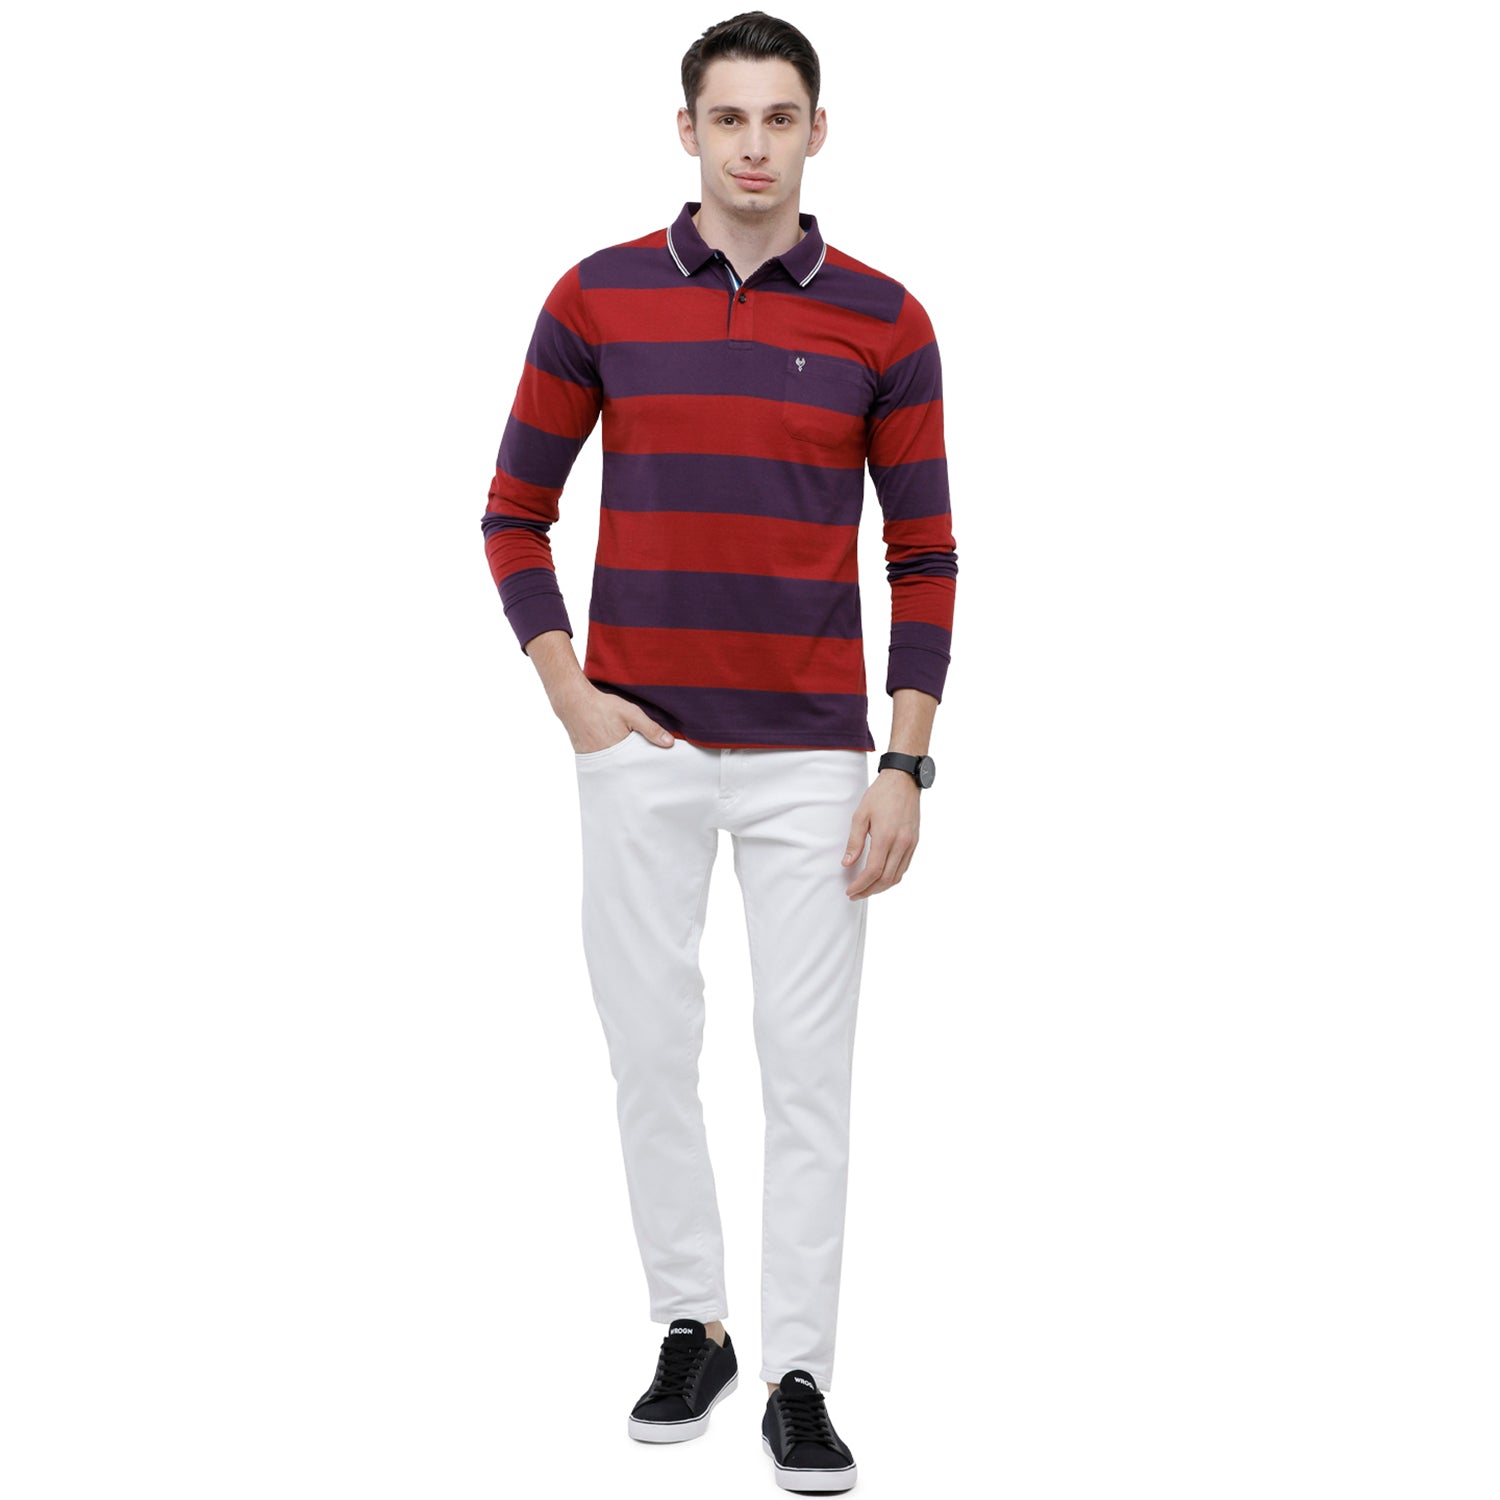 Classic Polo Men's Red & Blue Striped Polo Full Sleeve Slim Fit T-Shirt - VERNO - 262 A SF P T-shirt Classic Polo 